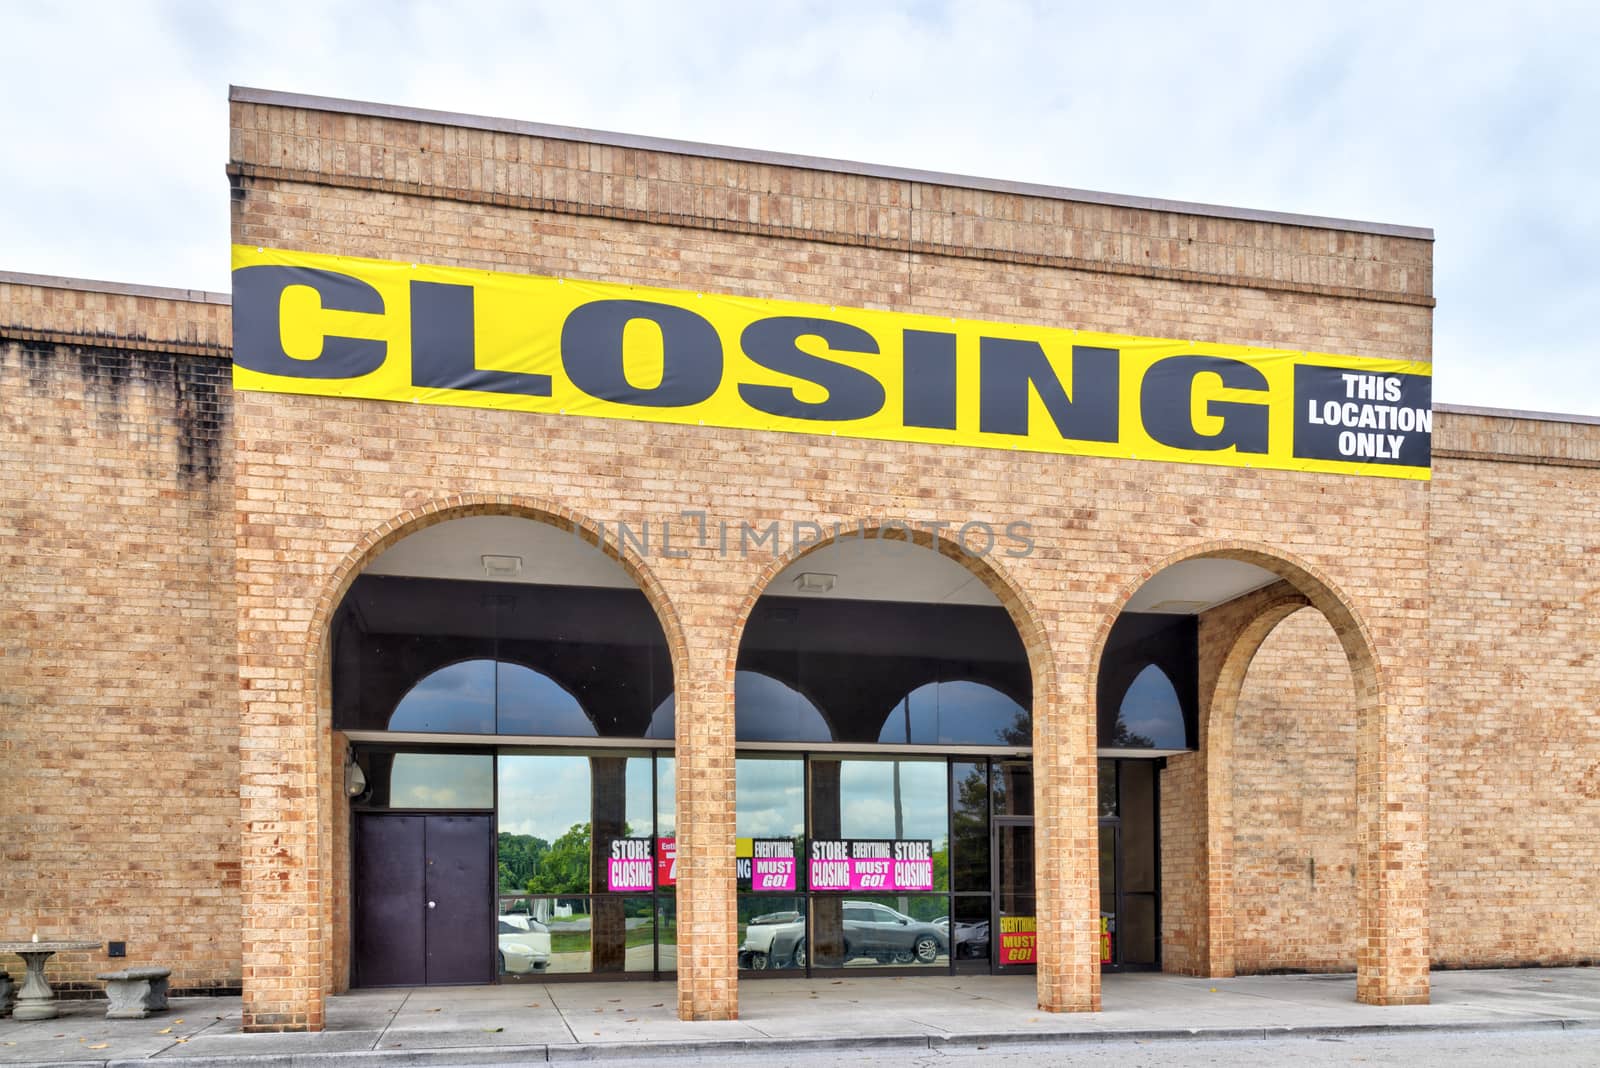 Mall Anchor Store Going Out Of Business Following Pandemic by stockbuster1